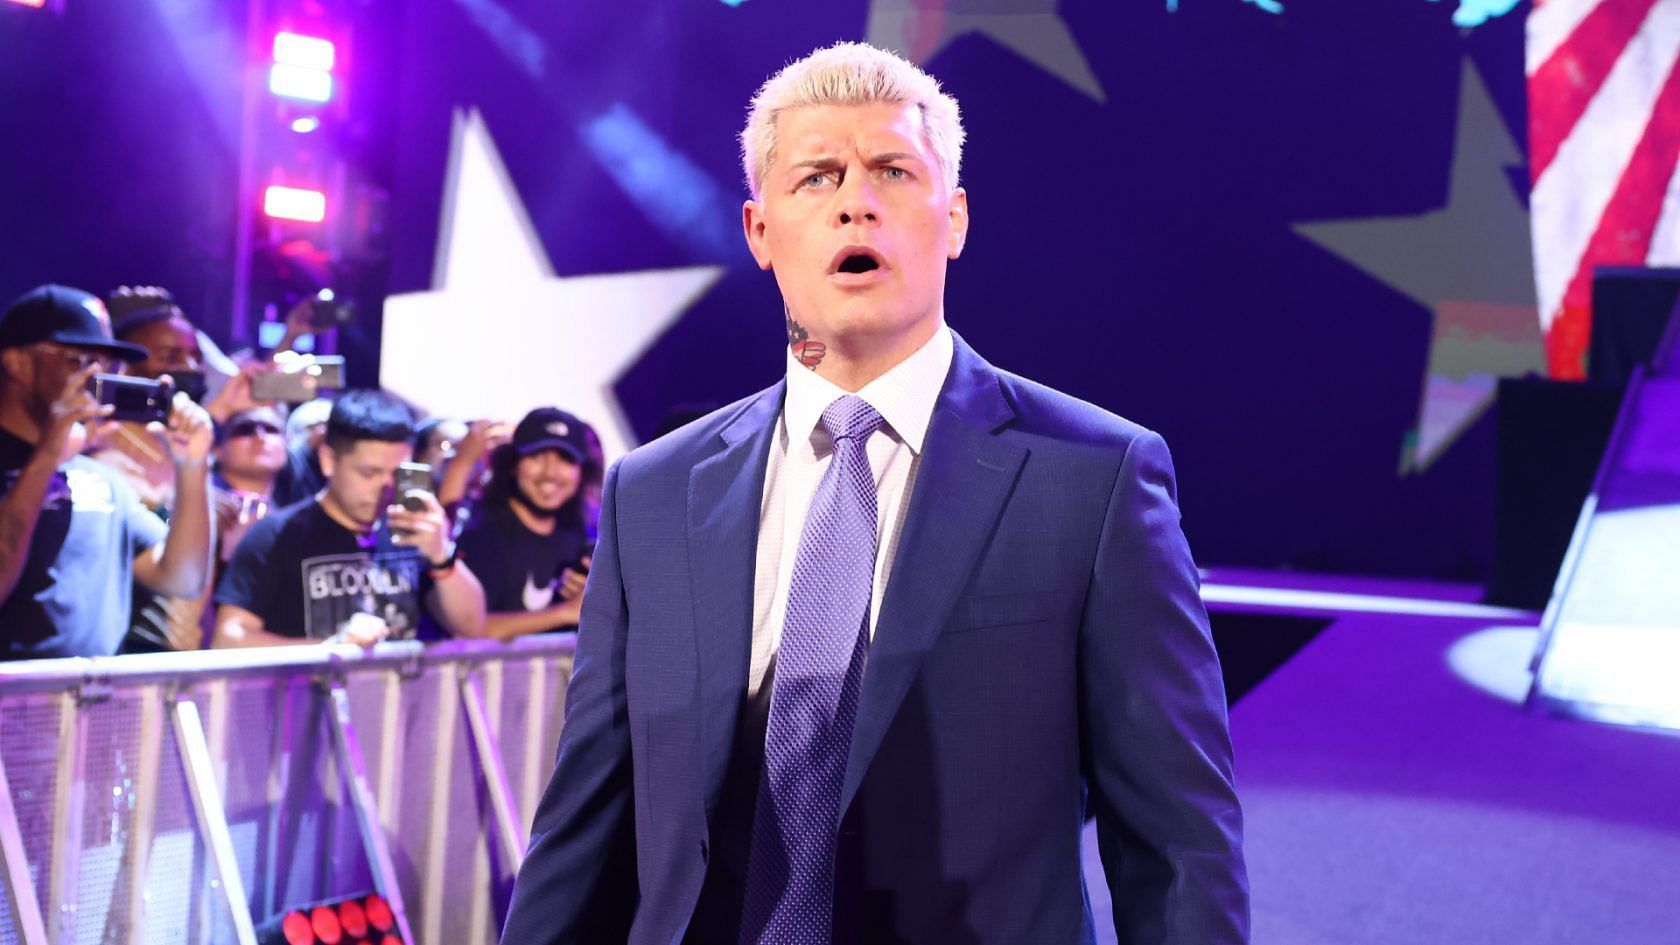 Cody Rhodes has been a top draw in WWE since his return.